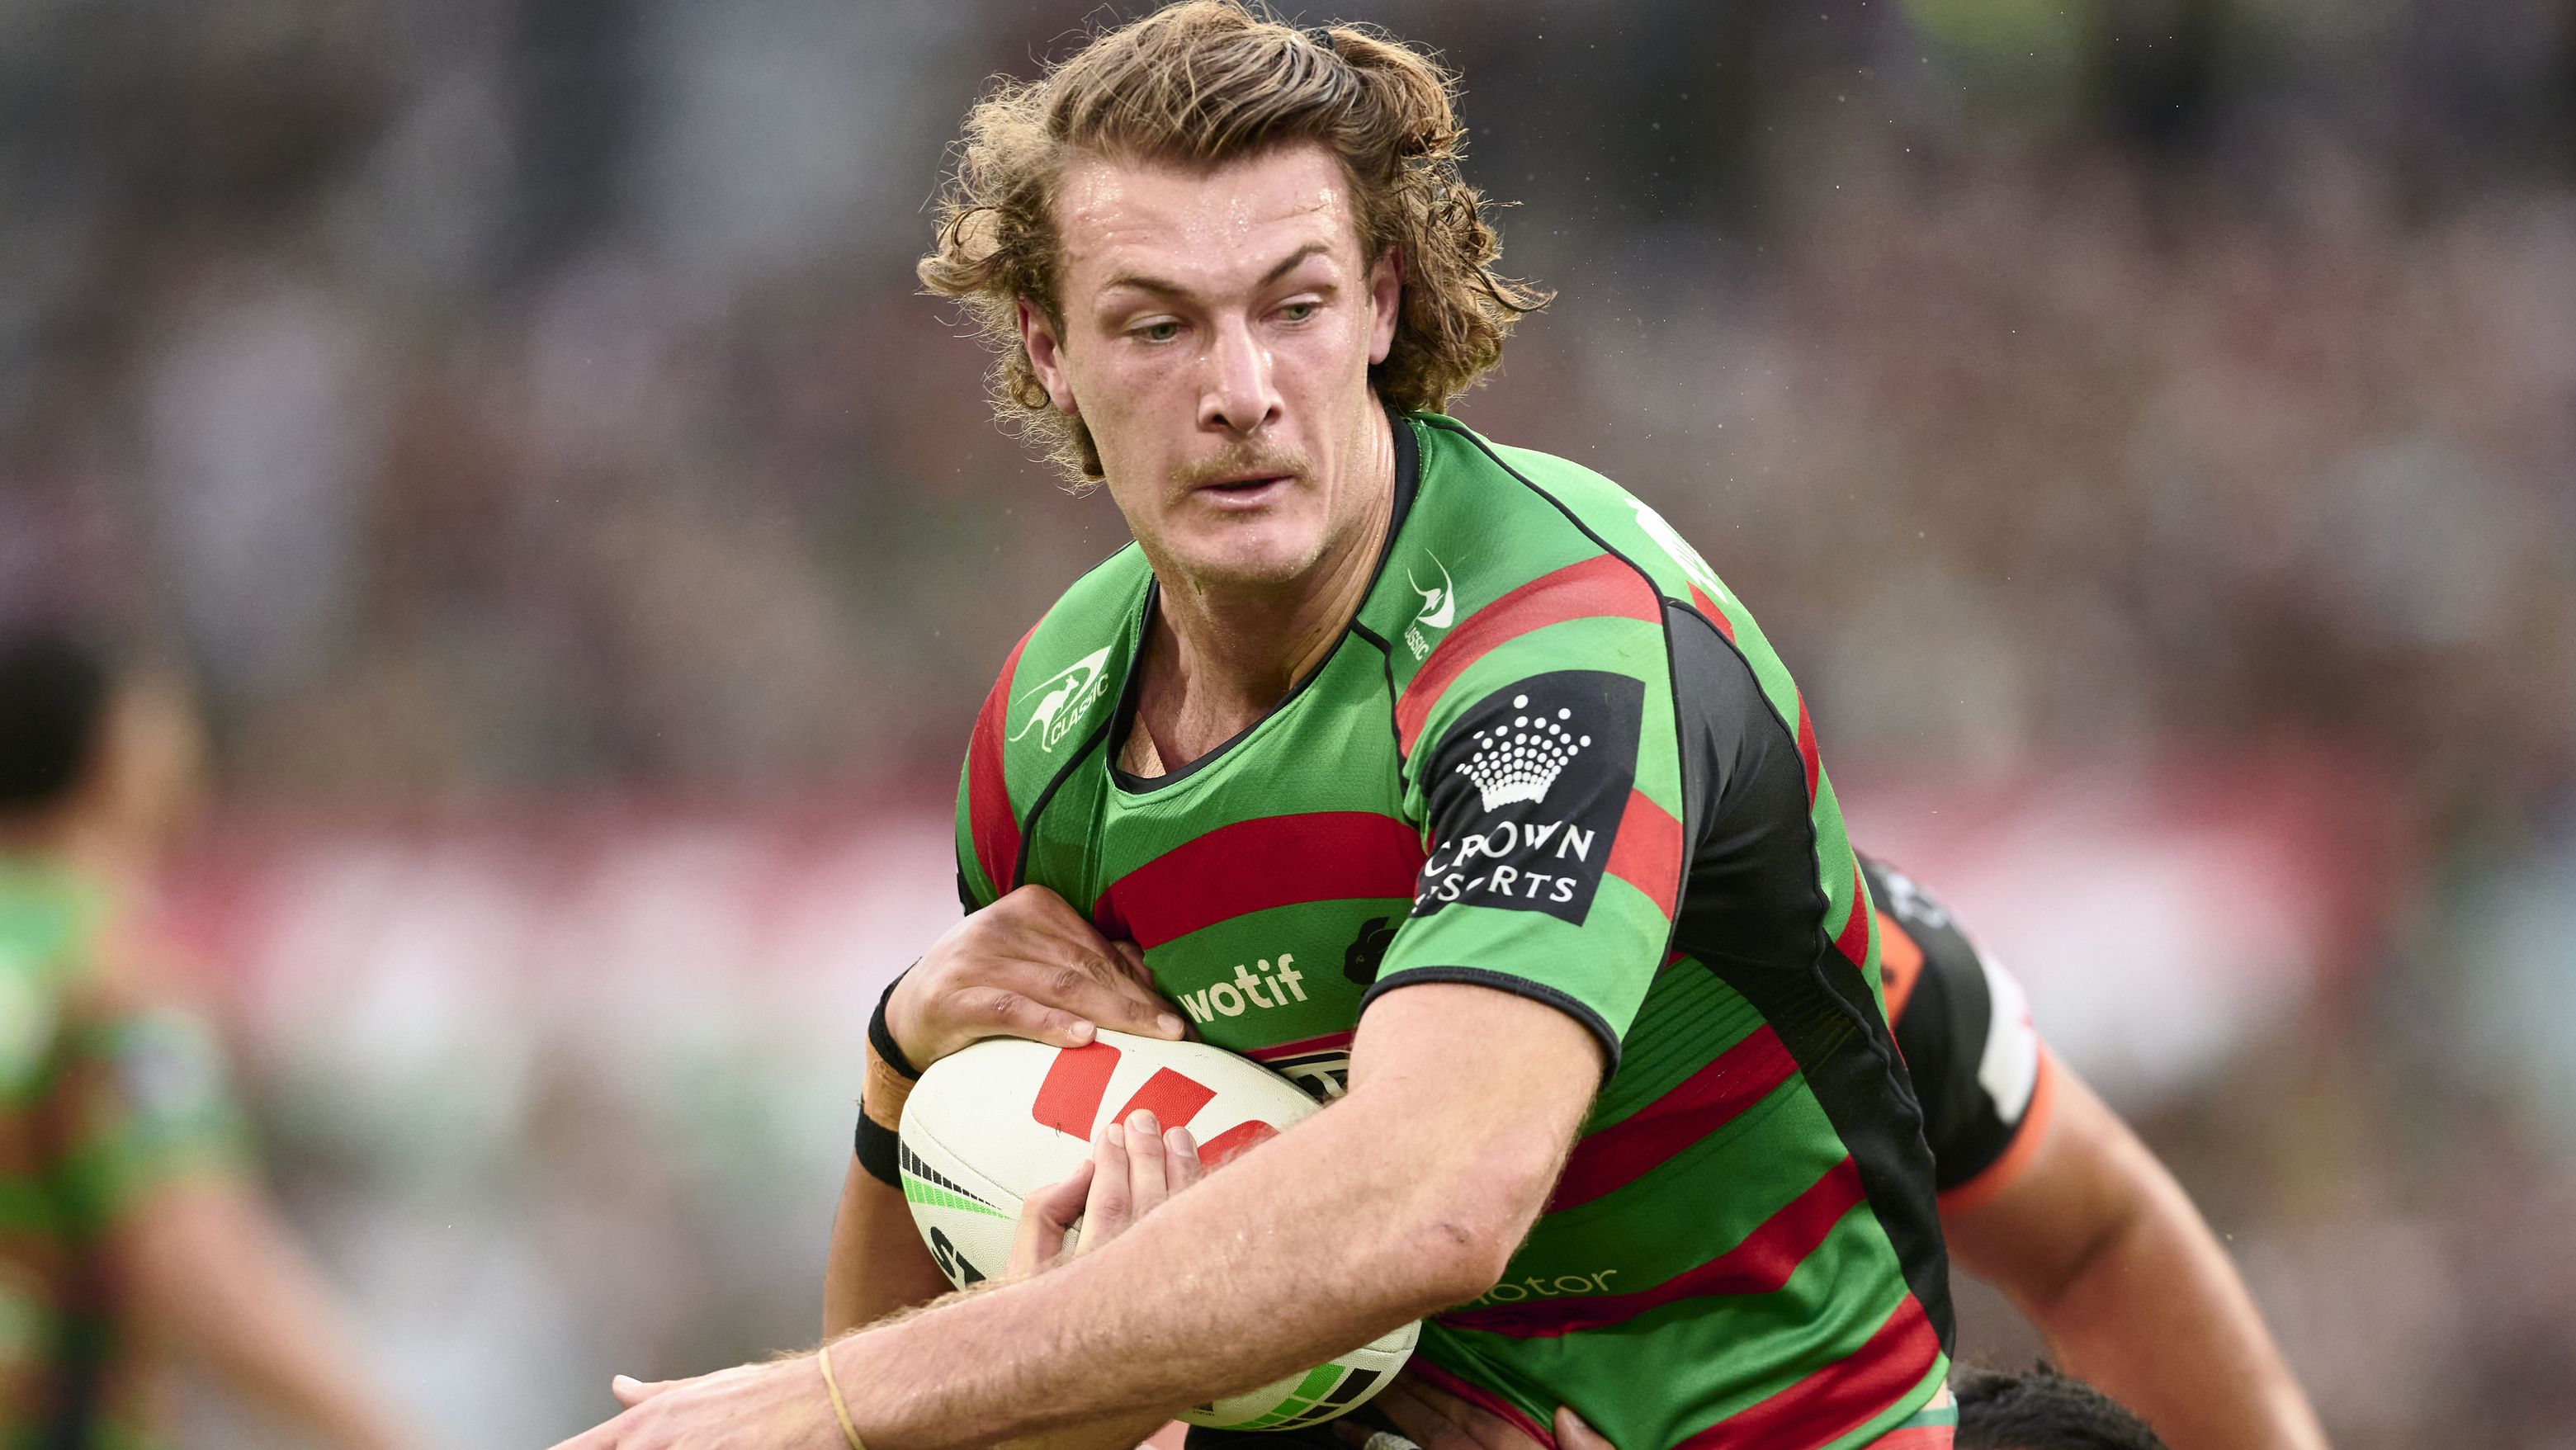 Campbell Graham enhanced his State of Origin credentials with yet another dominant performance for the Rabbitohs